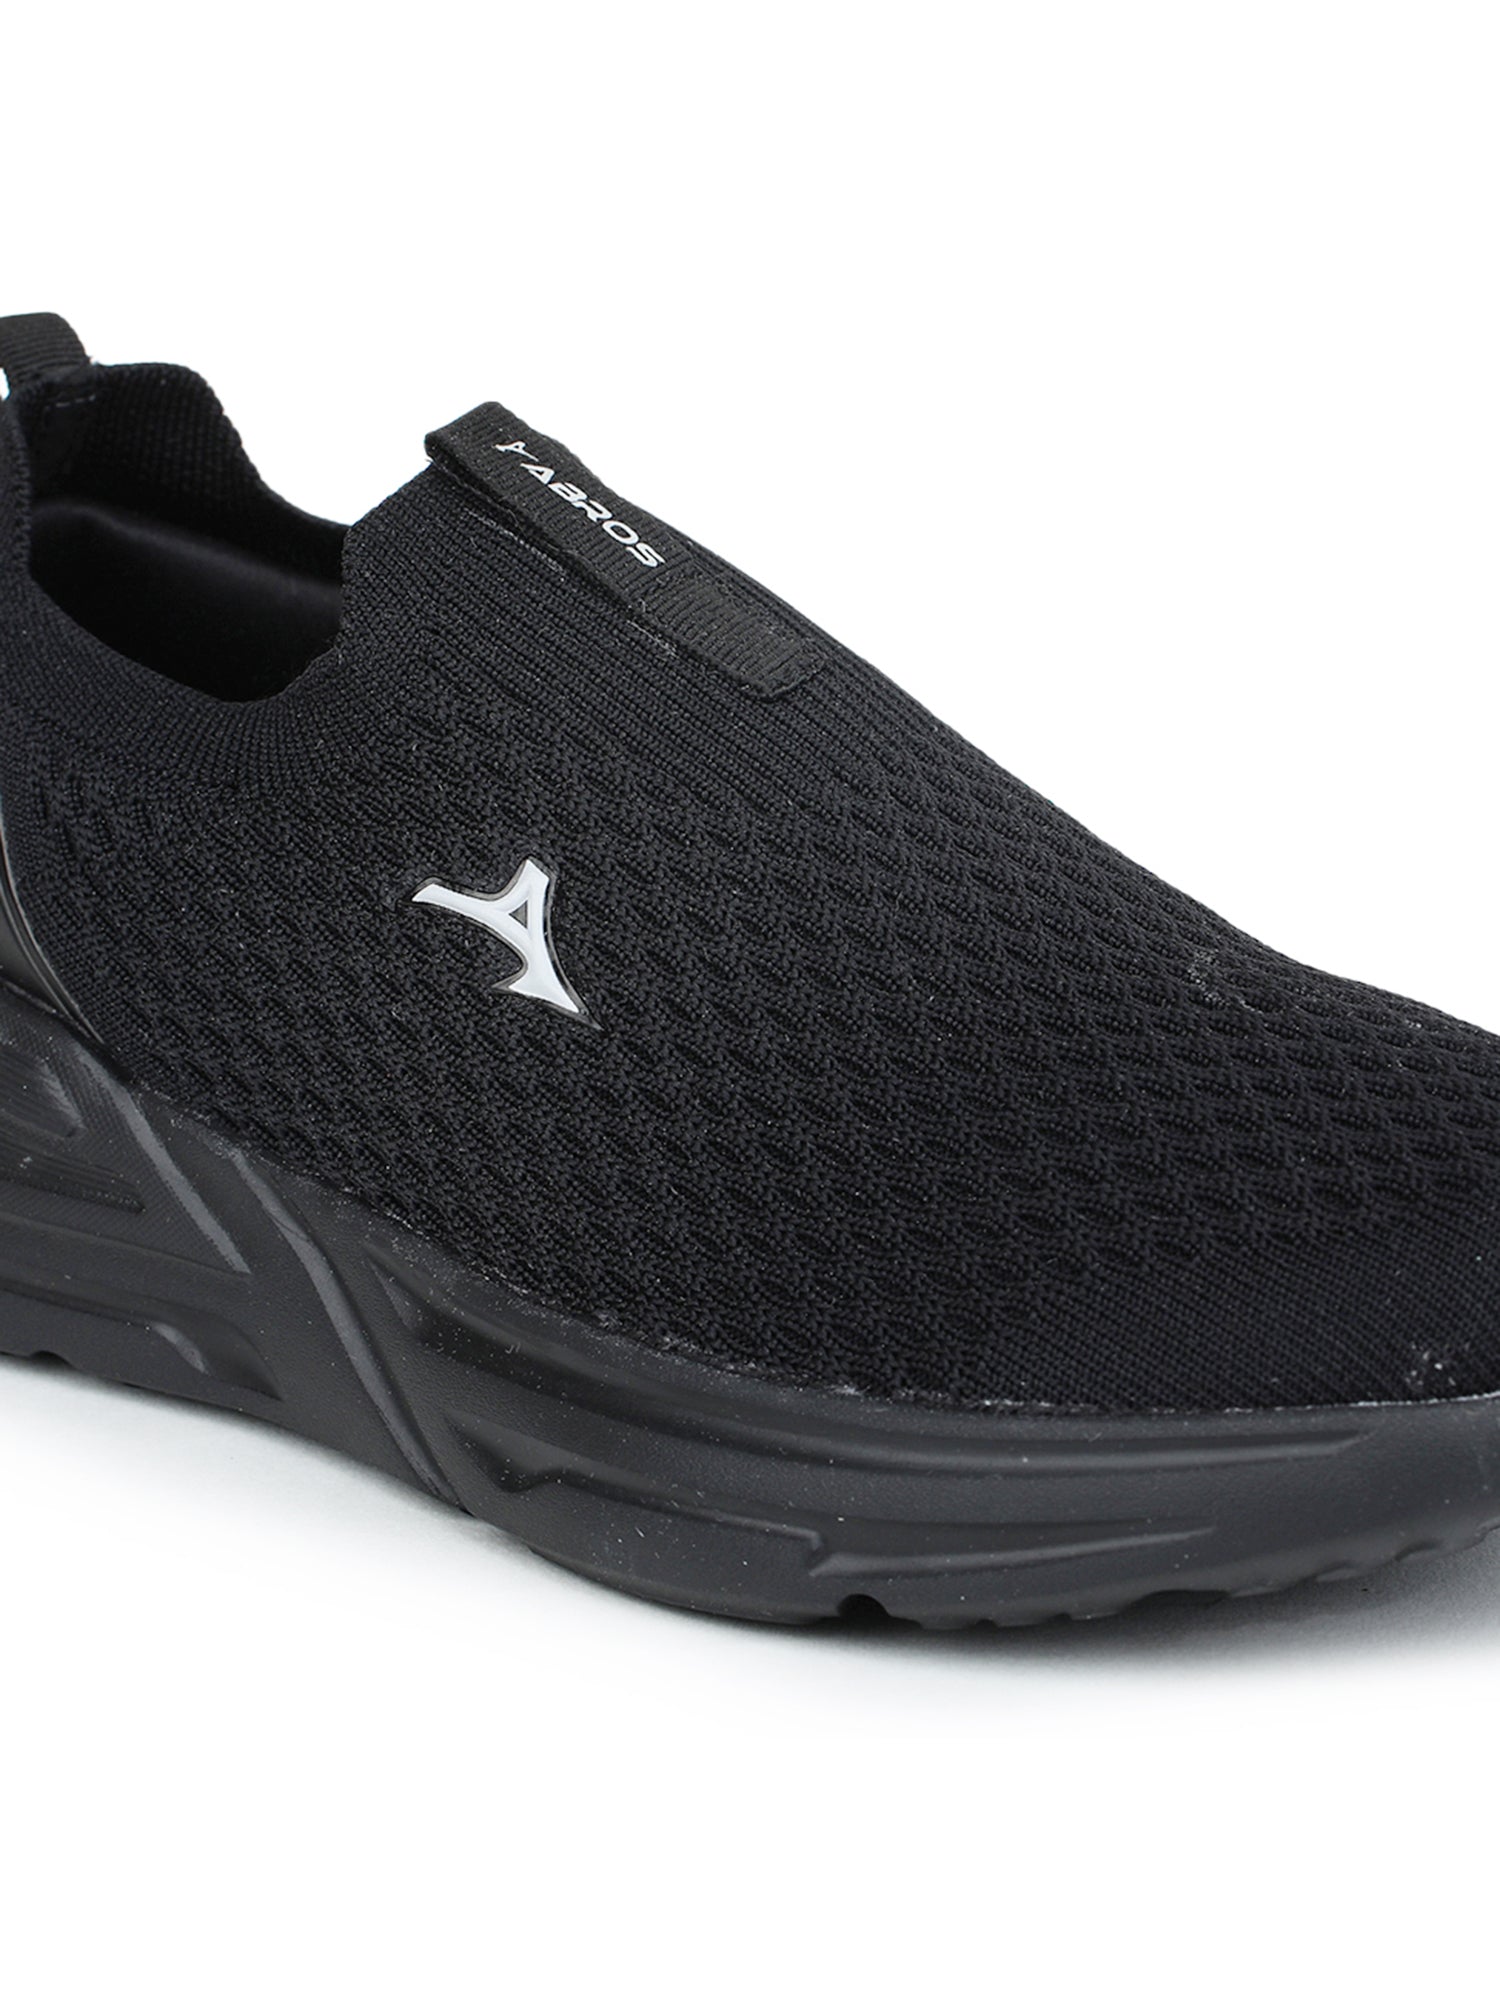 Kyant Sports Shoes For Men